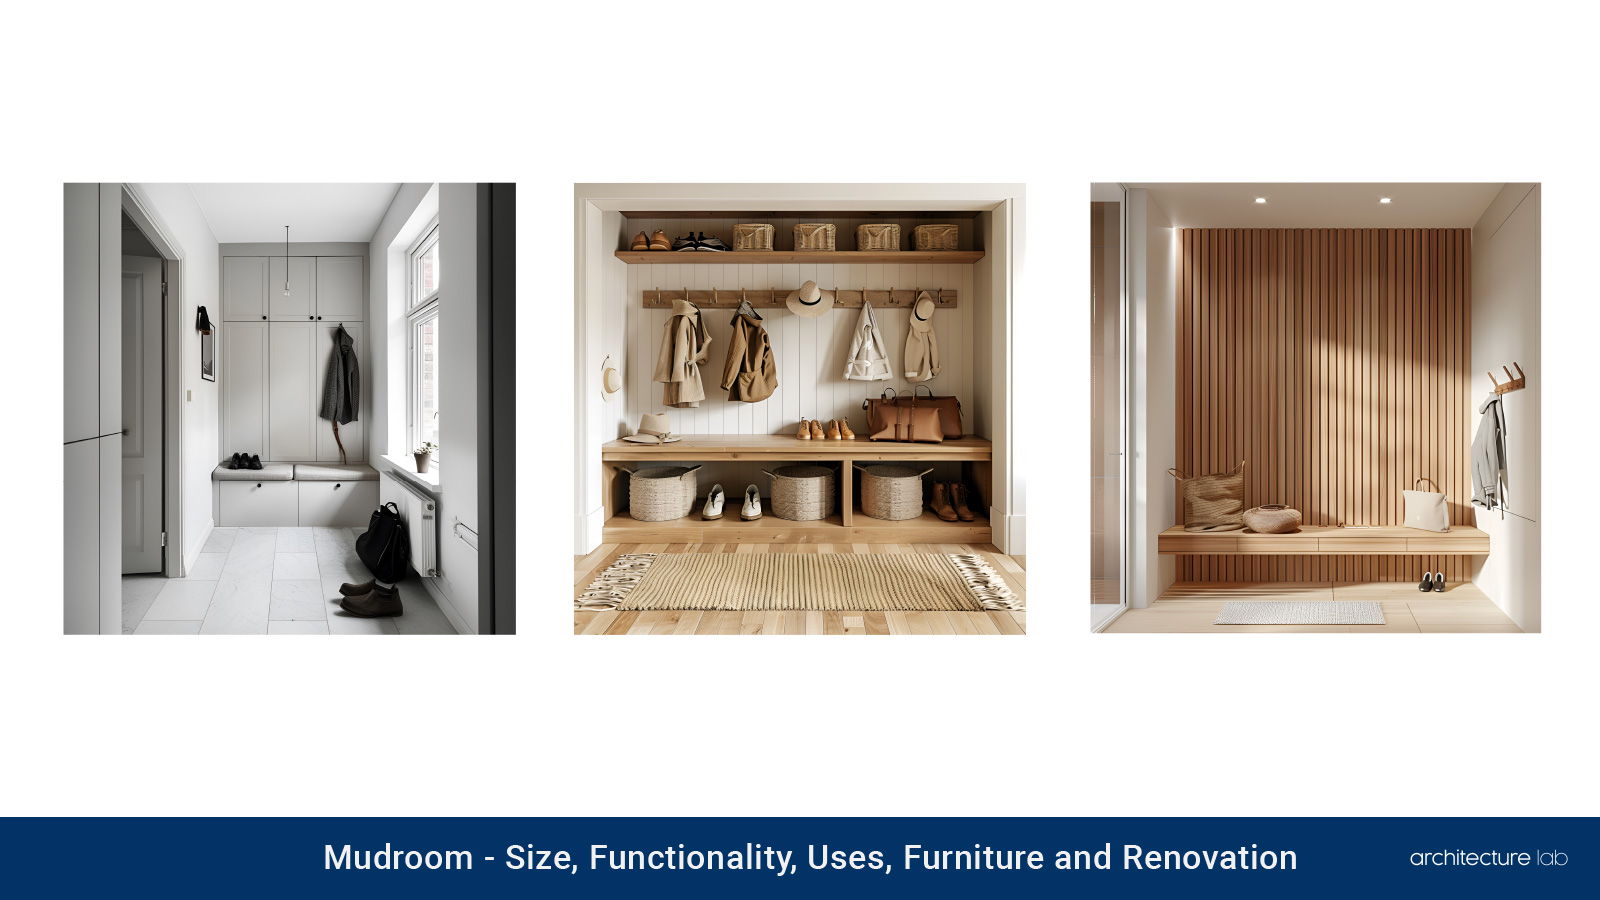 Mudroom: size, functionality, uses, furniture and renovation